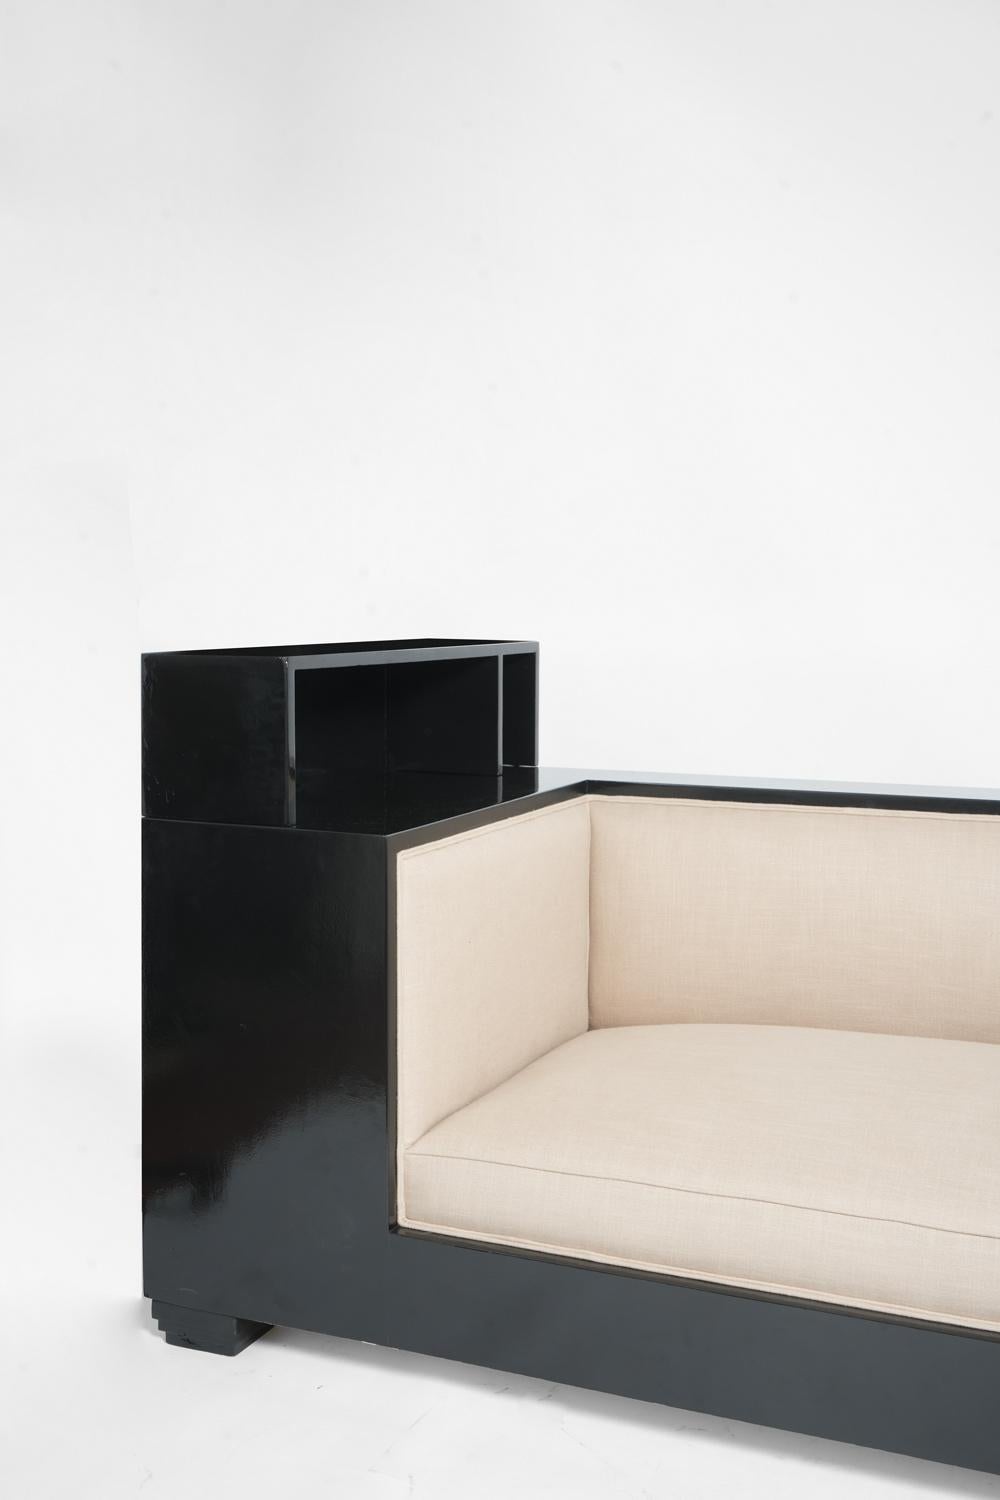 Sofa with full cheeks in black lacquered wood, wide armrests and resting on small stepped feet enhanced by plinth feet. in the style of Djo Bourgeois. France, 1930s.